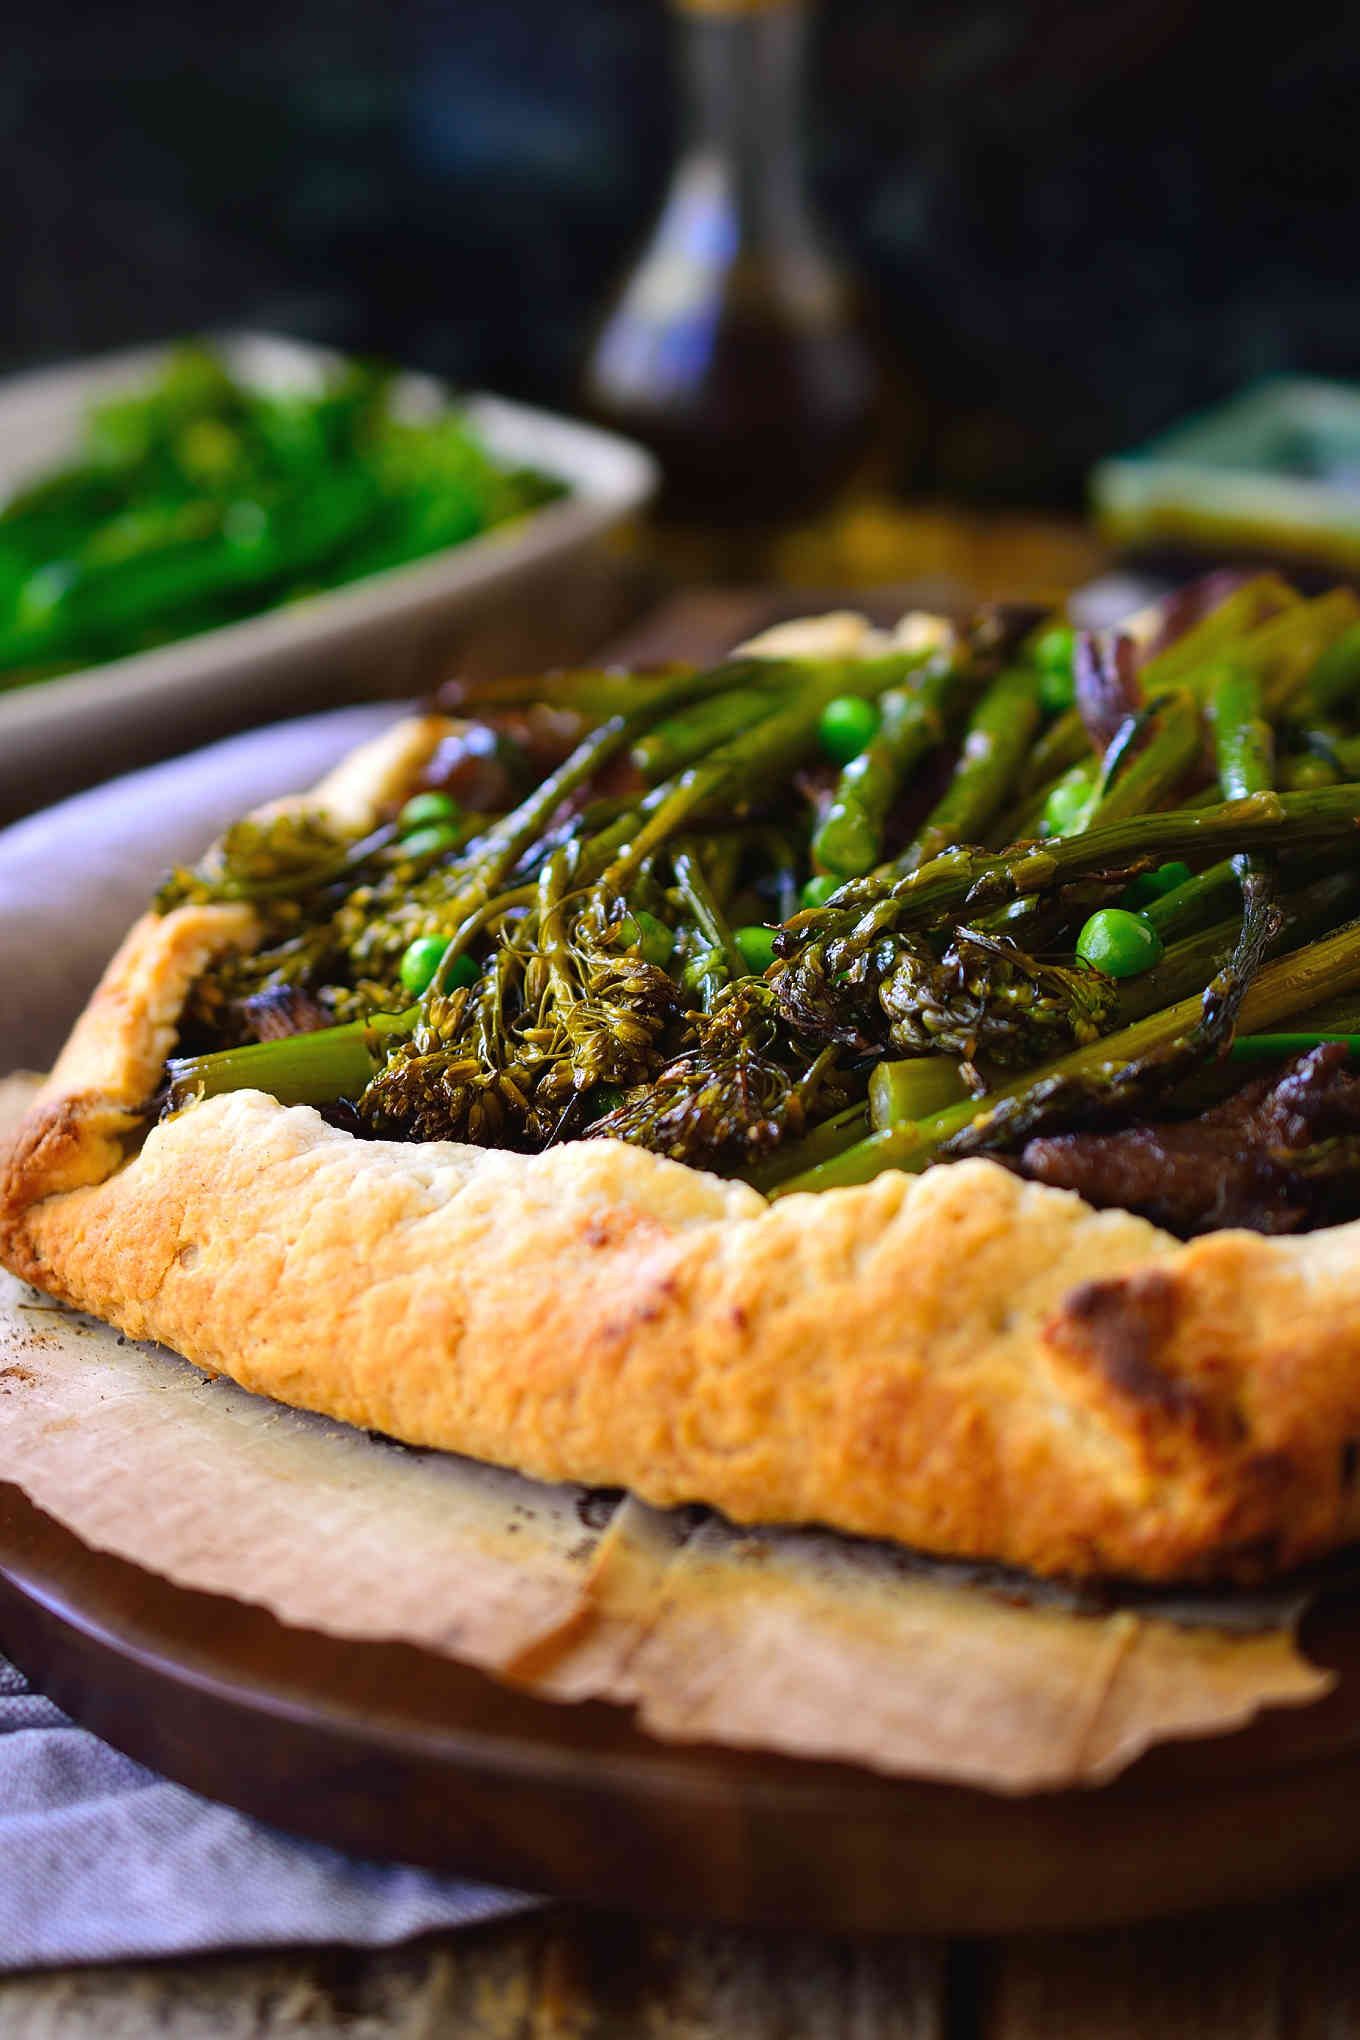 This vegan galette encompasses all the flavours of spring with fresh asparagus, broccolini and garden peas on a bed of kale and vegan ricotta cheese. Sautéed oyster mushrooms add a smoky, meaty element and the vegan pie crust is light and deliciously flaky. Serve this spring vegetable vegan galette as part of an Easter meal, mother’s day brunch, take it to a picnic or for just a regular Tuesday night dinner to welcome spring’s wonderful produce!